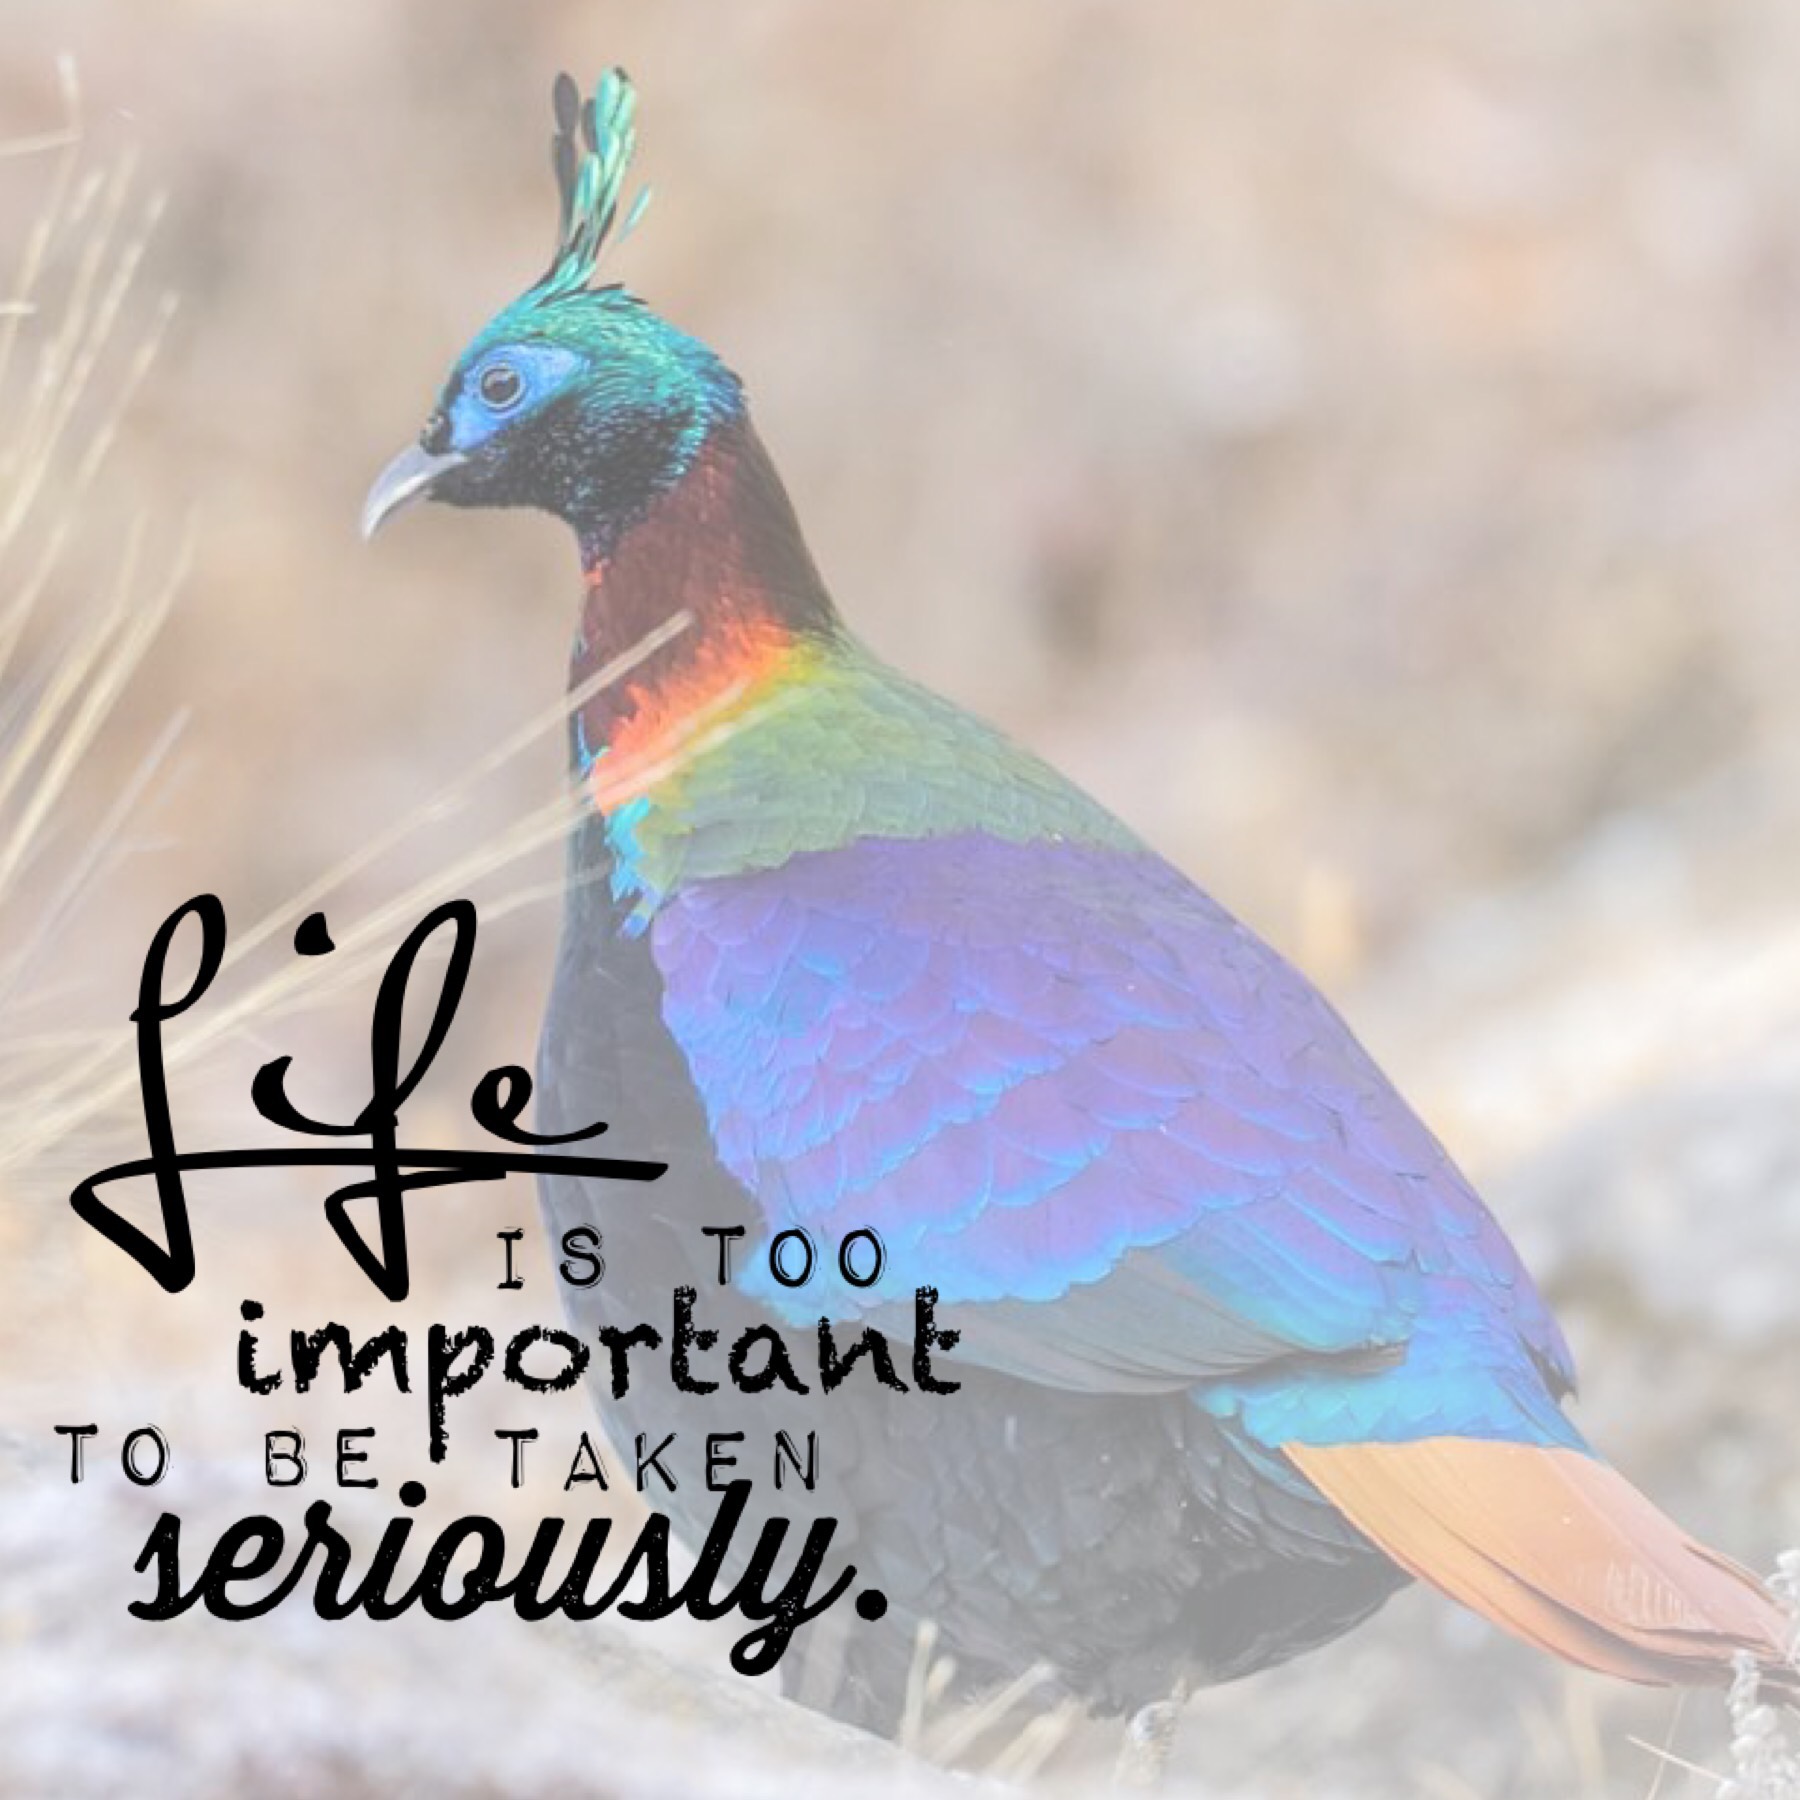 Life is too important to be taken seriously.